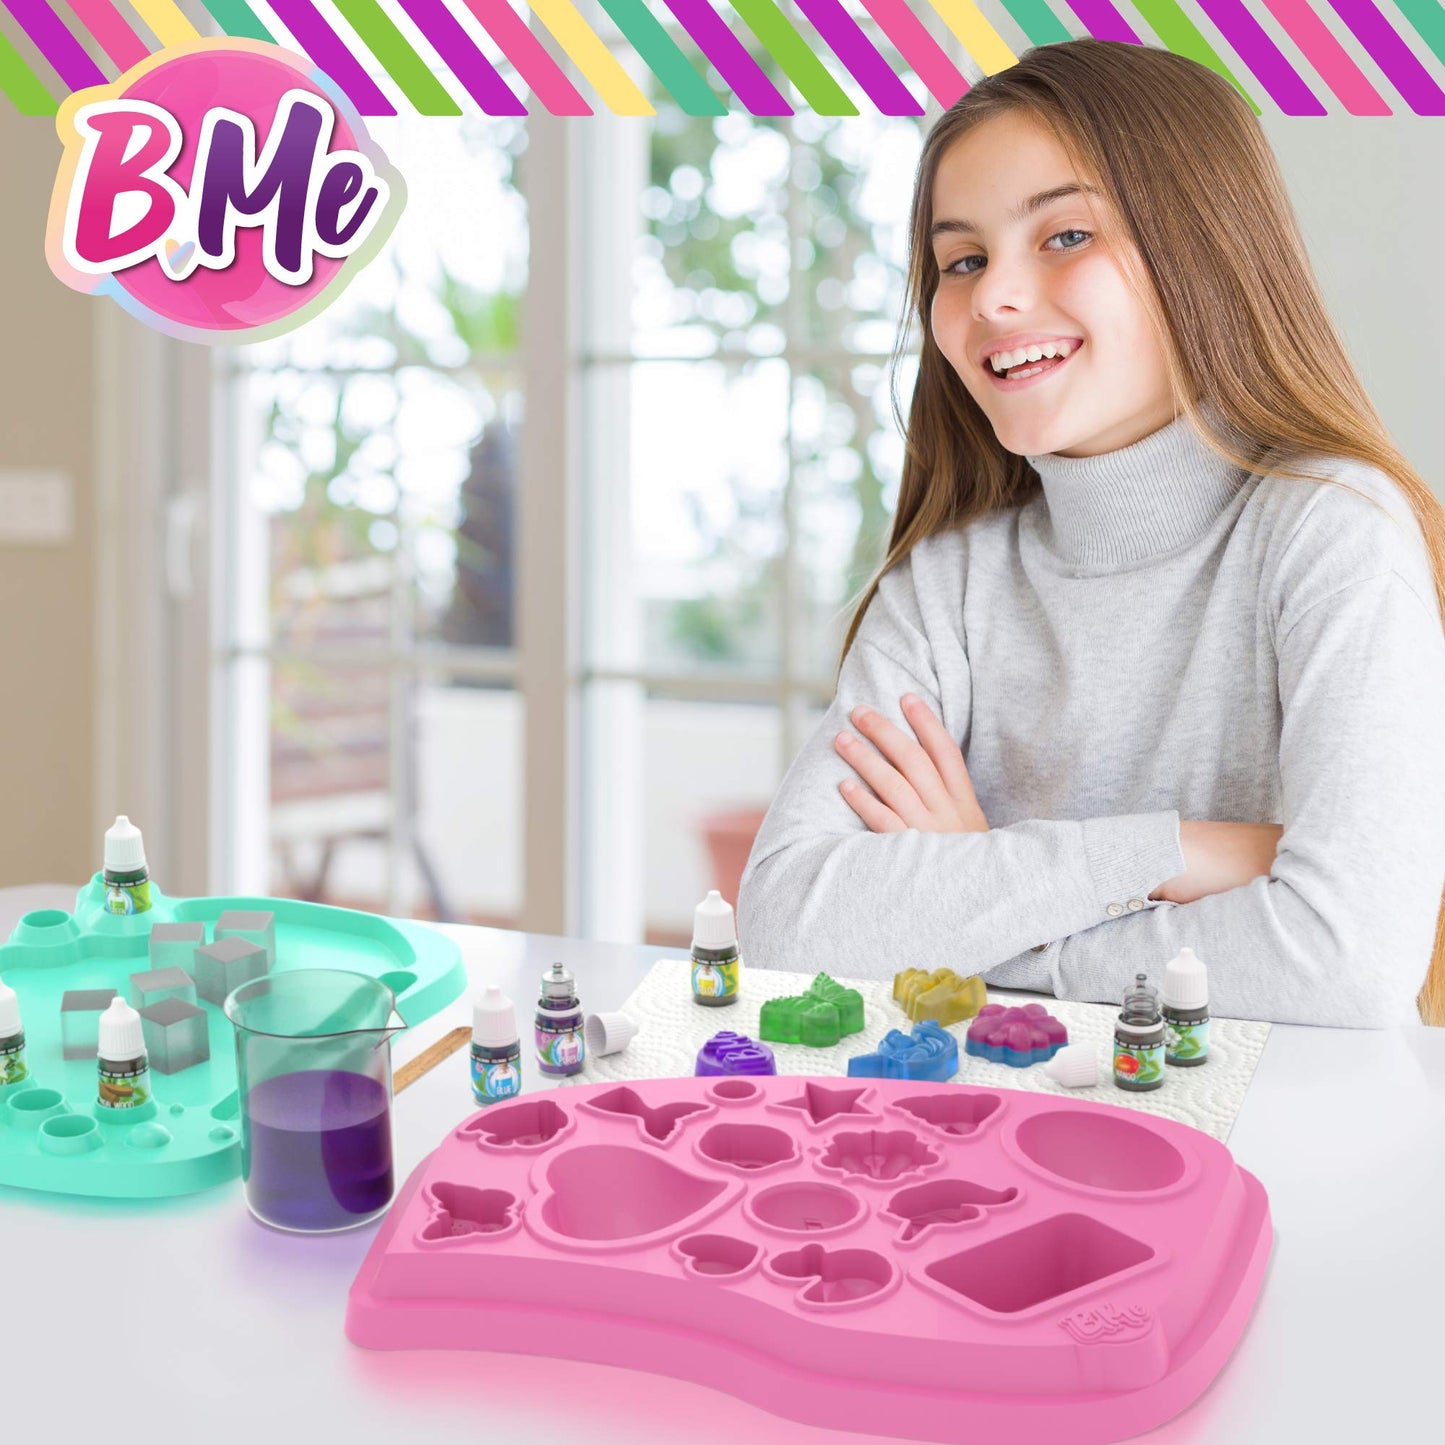 B Me Beginner Soap Making Craft Kits for Kids Girls Ages 6+ | Make 15+ Soap Shapes with 5 Different Scents | Make Your Own Soap Science Kits Toys